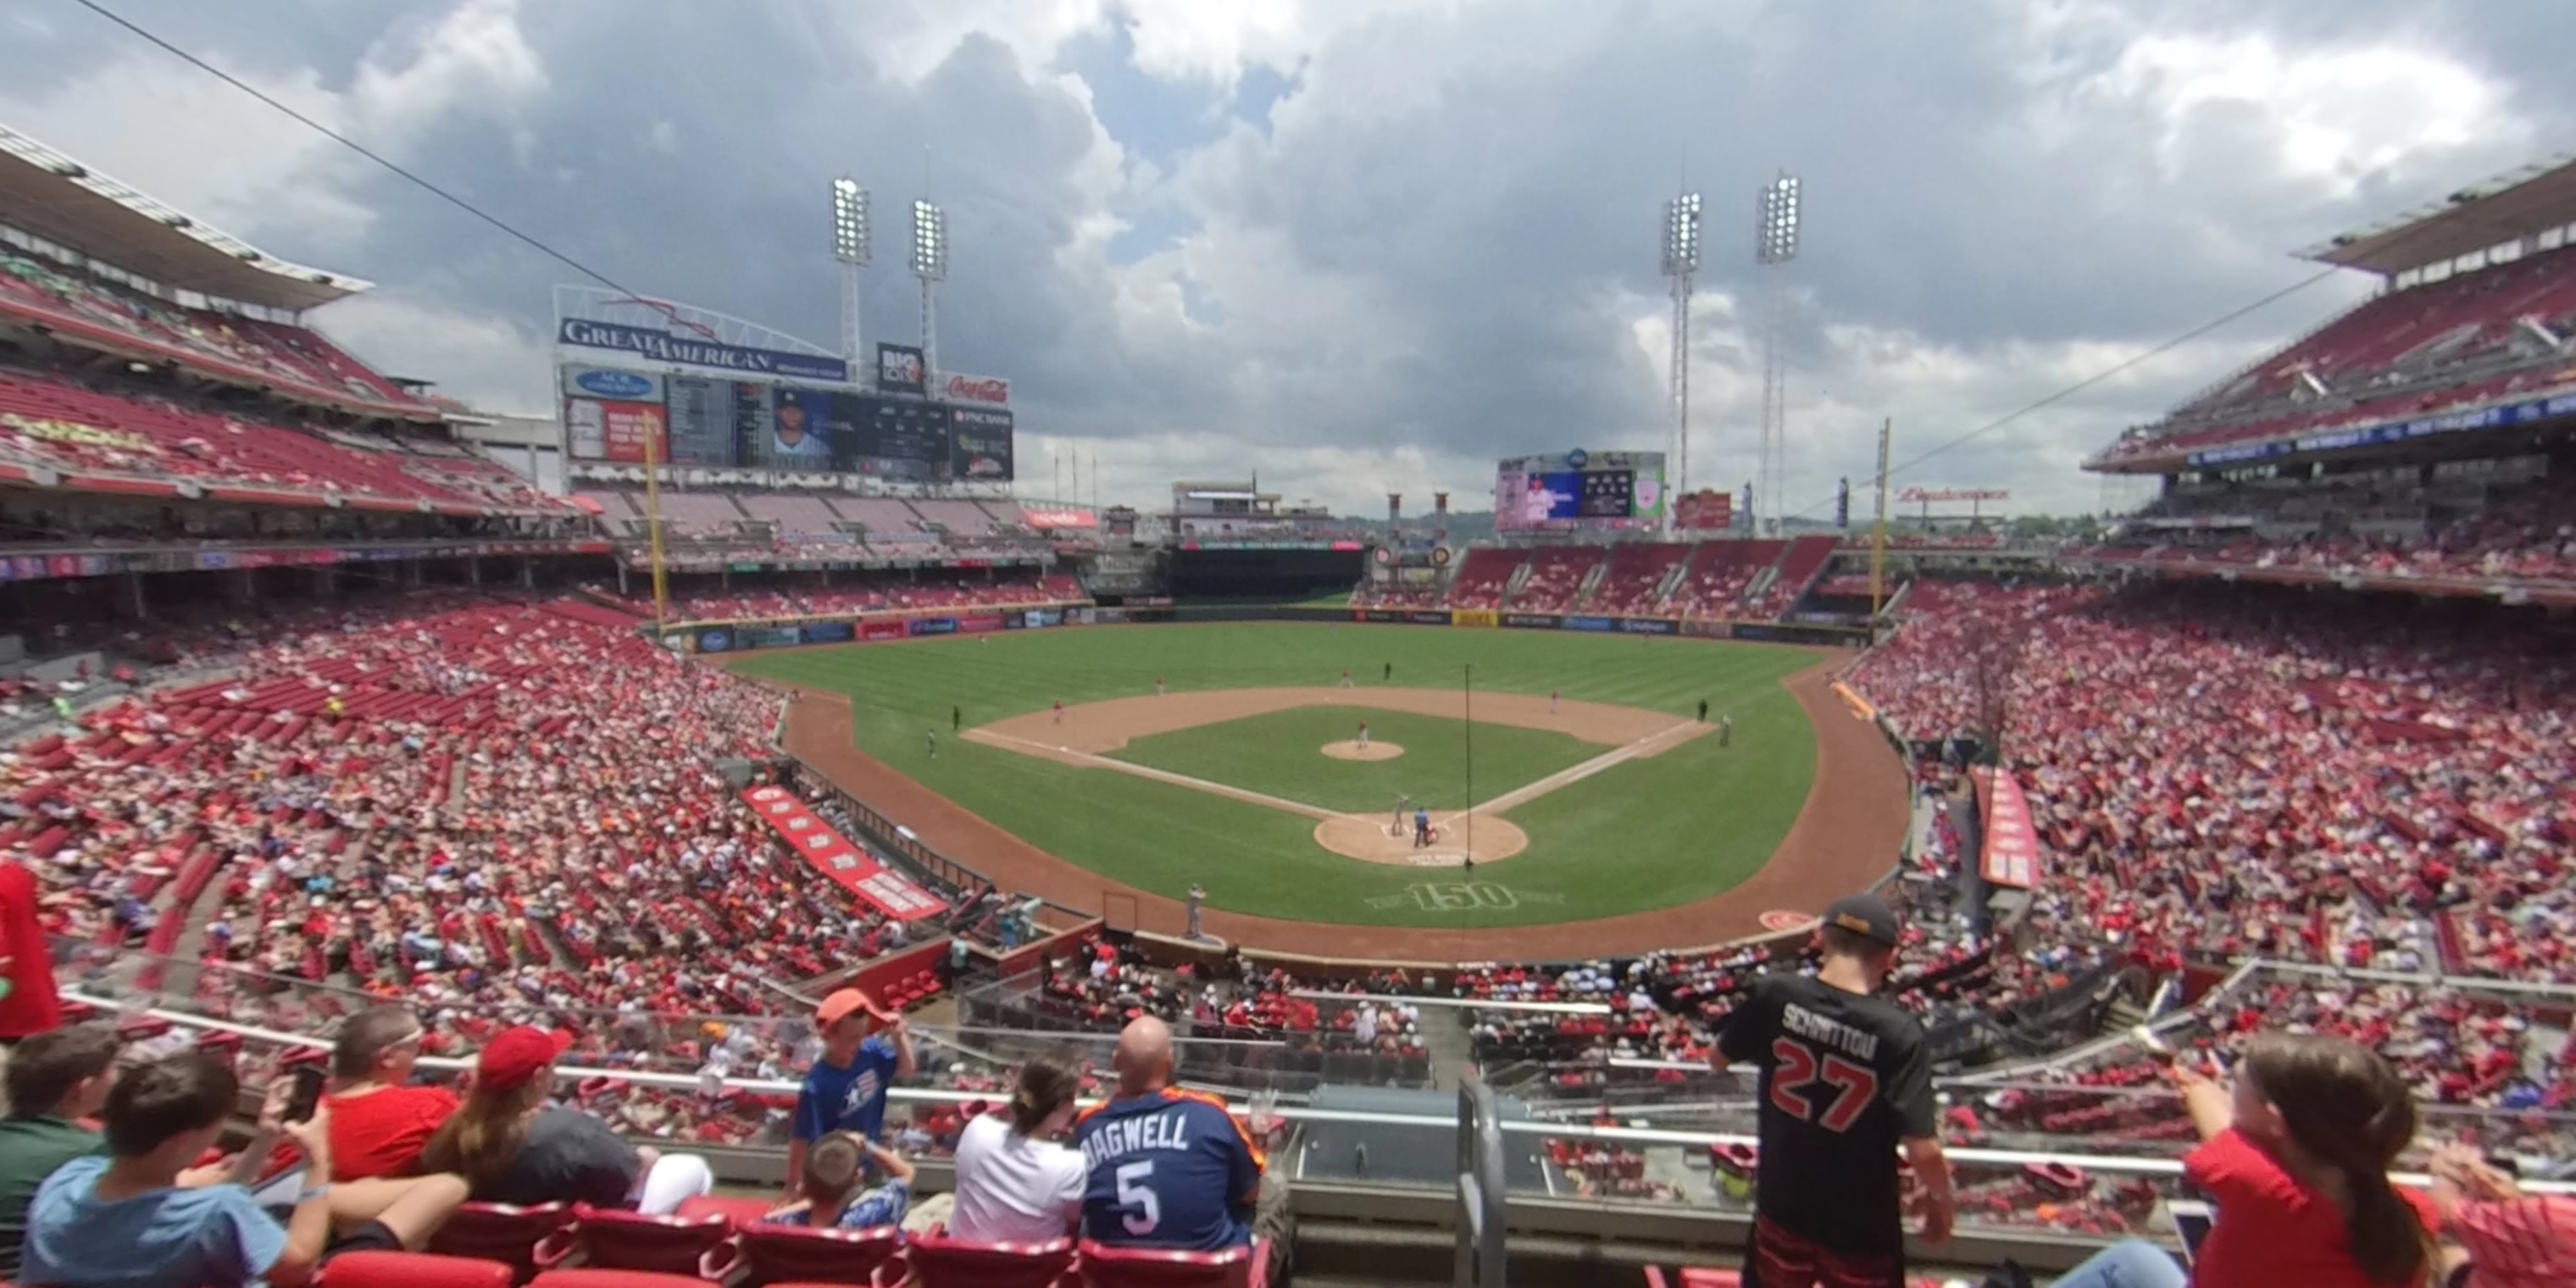 section 222 panoramic seat view  for baseball - great american ball park